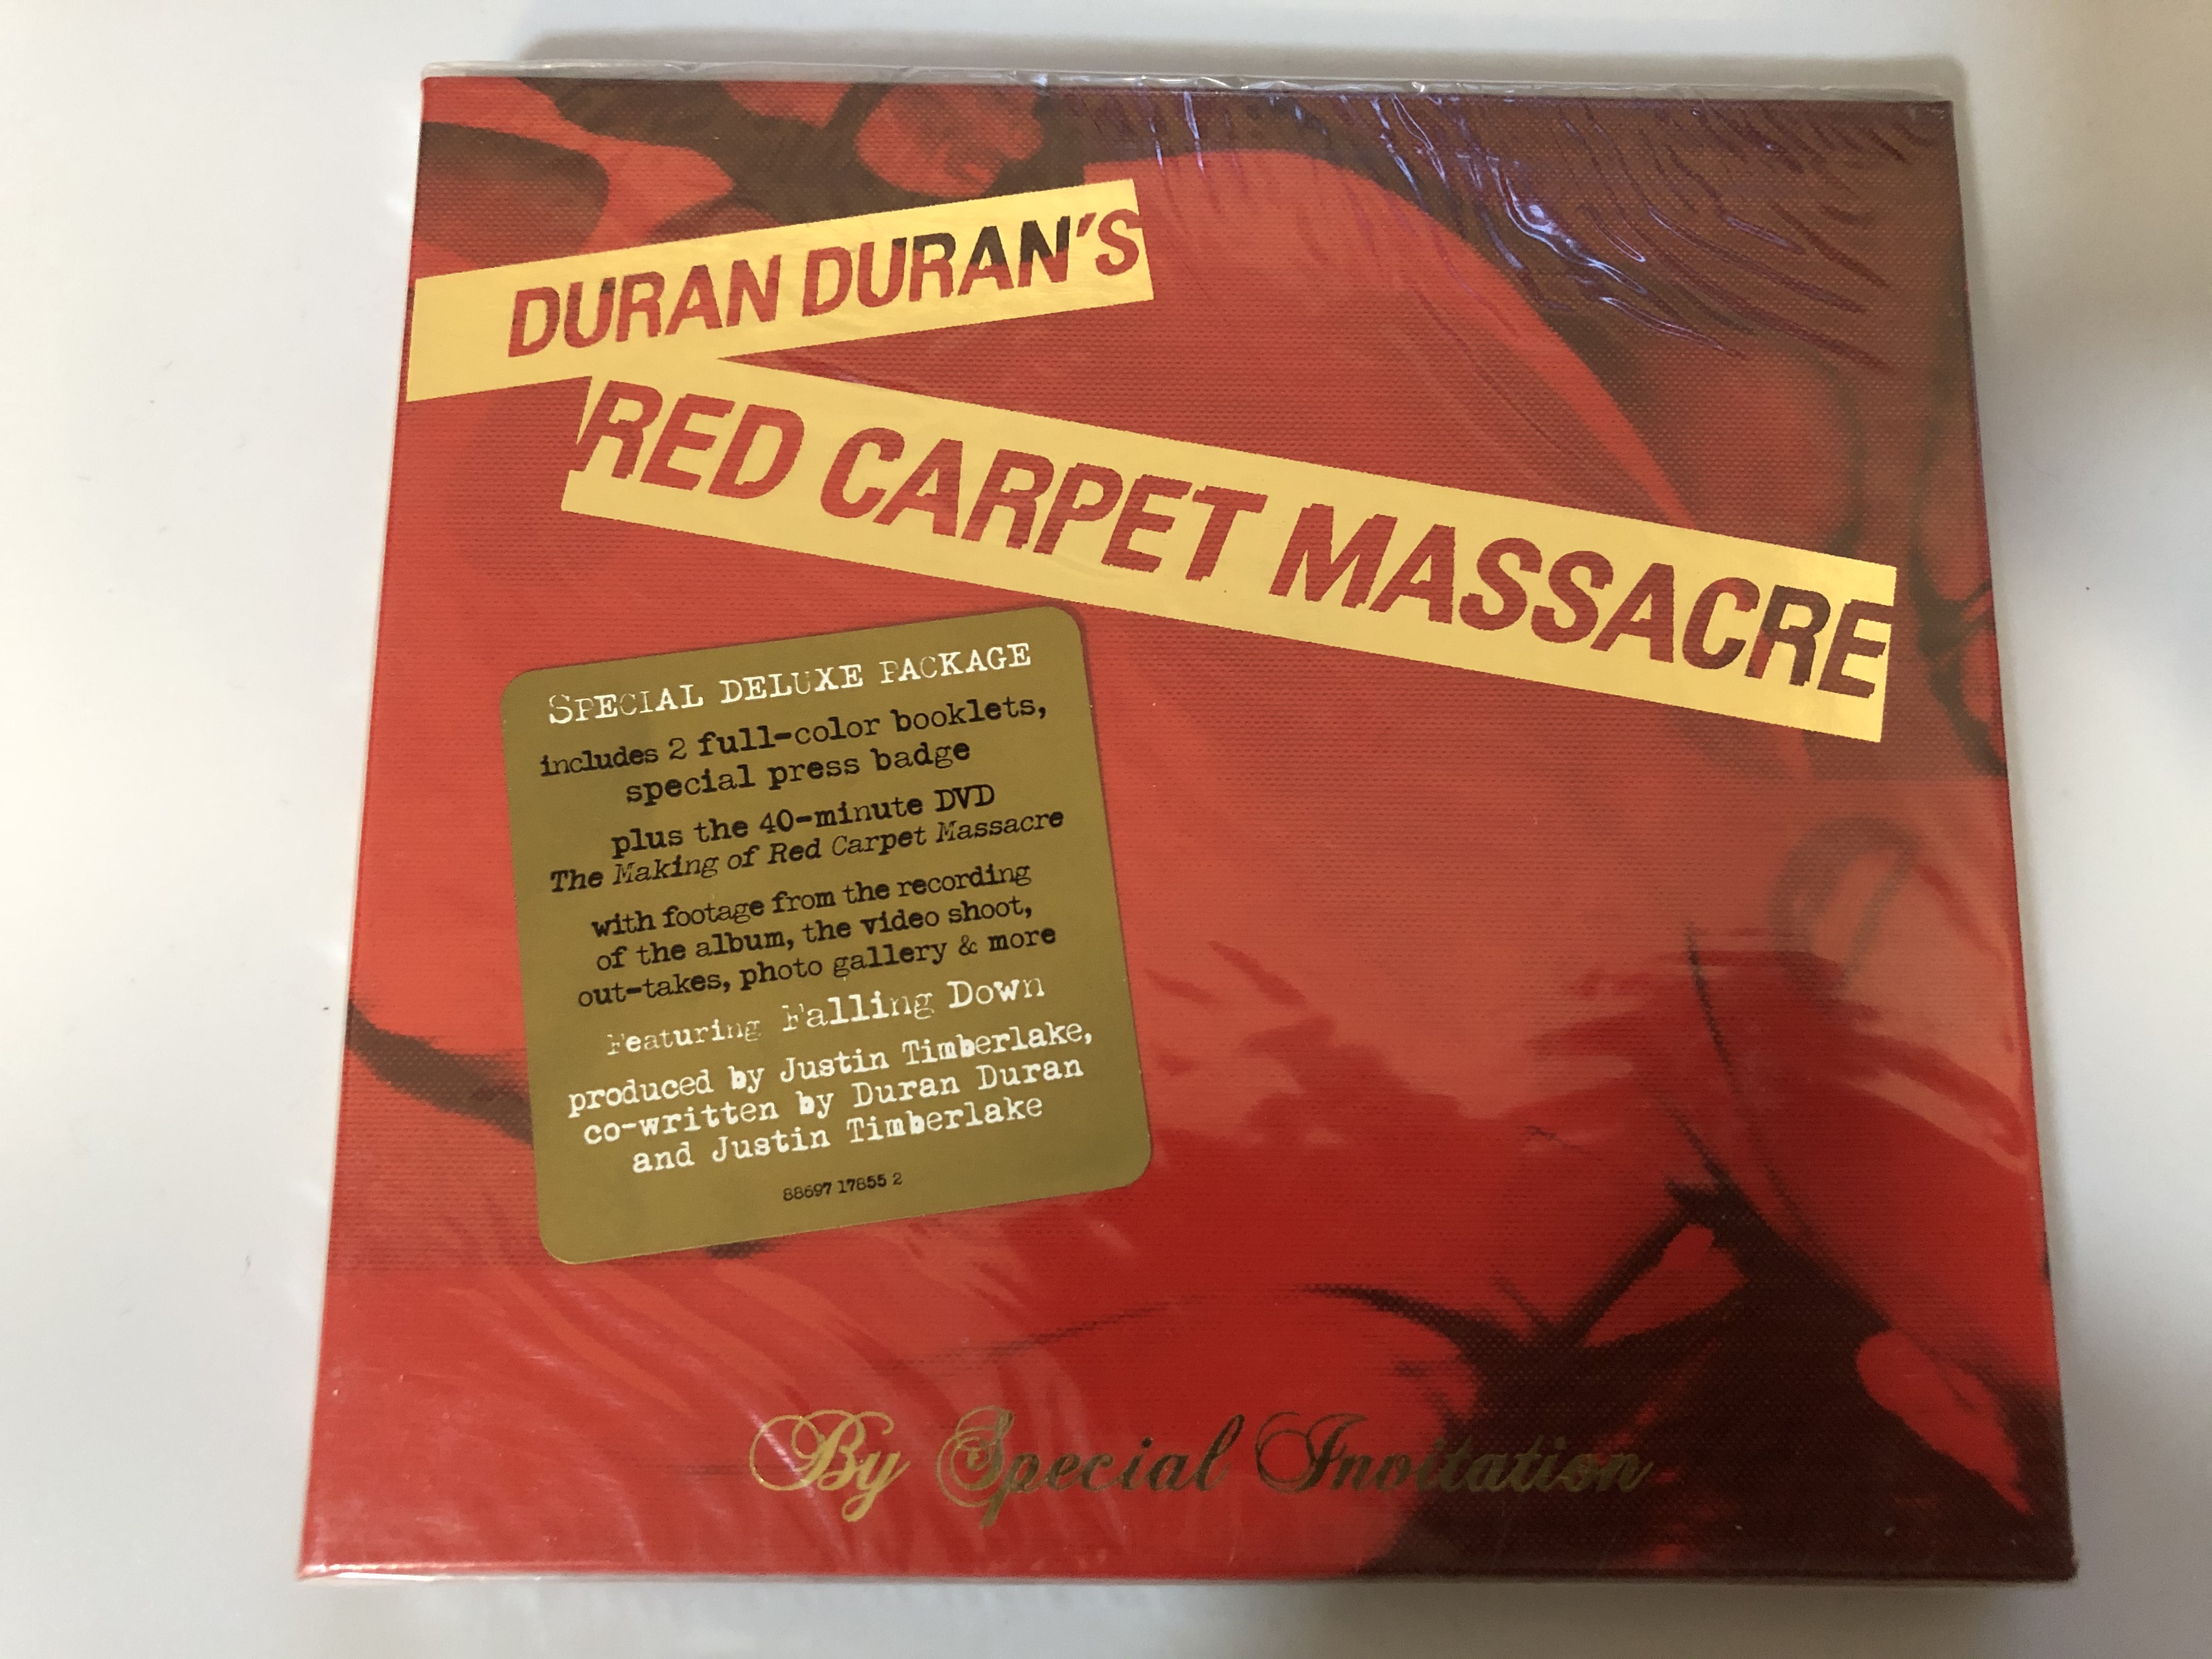 Duran Duran ‎– Red Carpet Massacre / Special Deluxe Package includes 2 full-color special press badge, plus the 40-minute DVD ''The Making Of Red Carpet Massacre'' / Epic ‎Audio CD + DVD CD 2007 / 88697 17855 2 - bibleinmylanguage